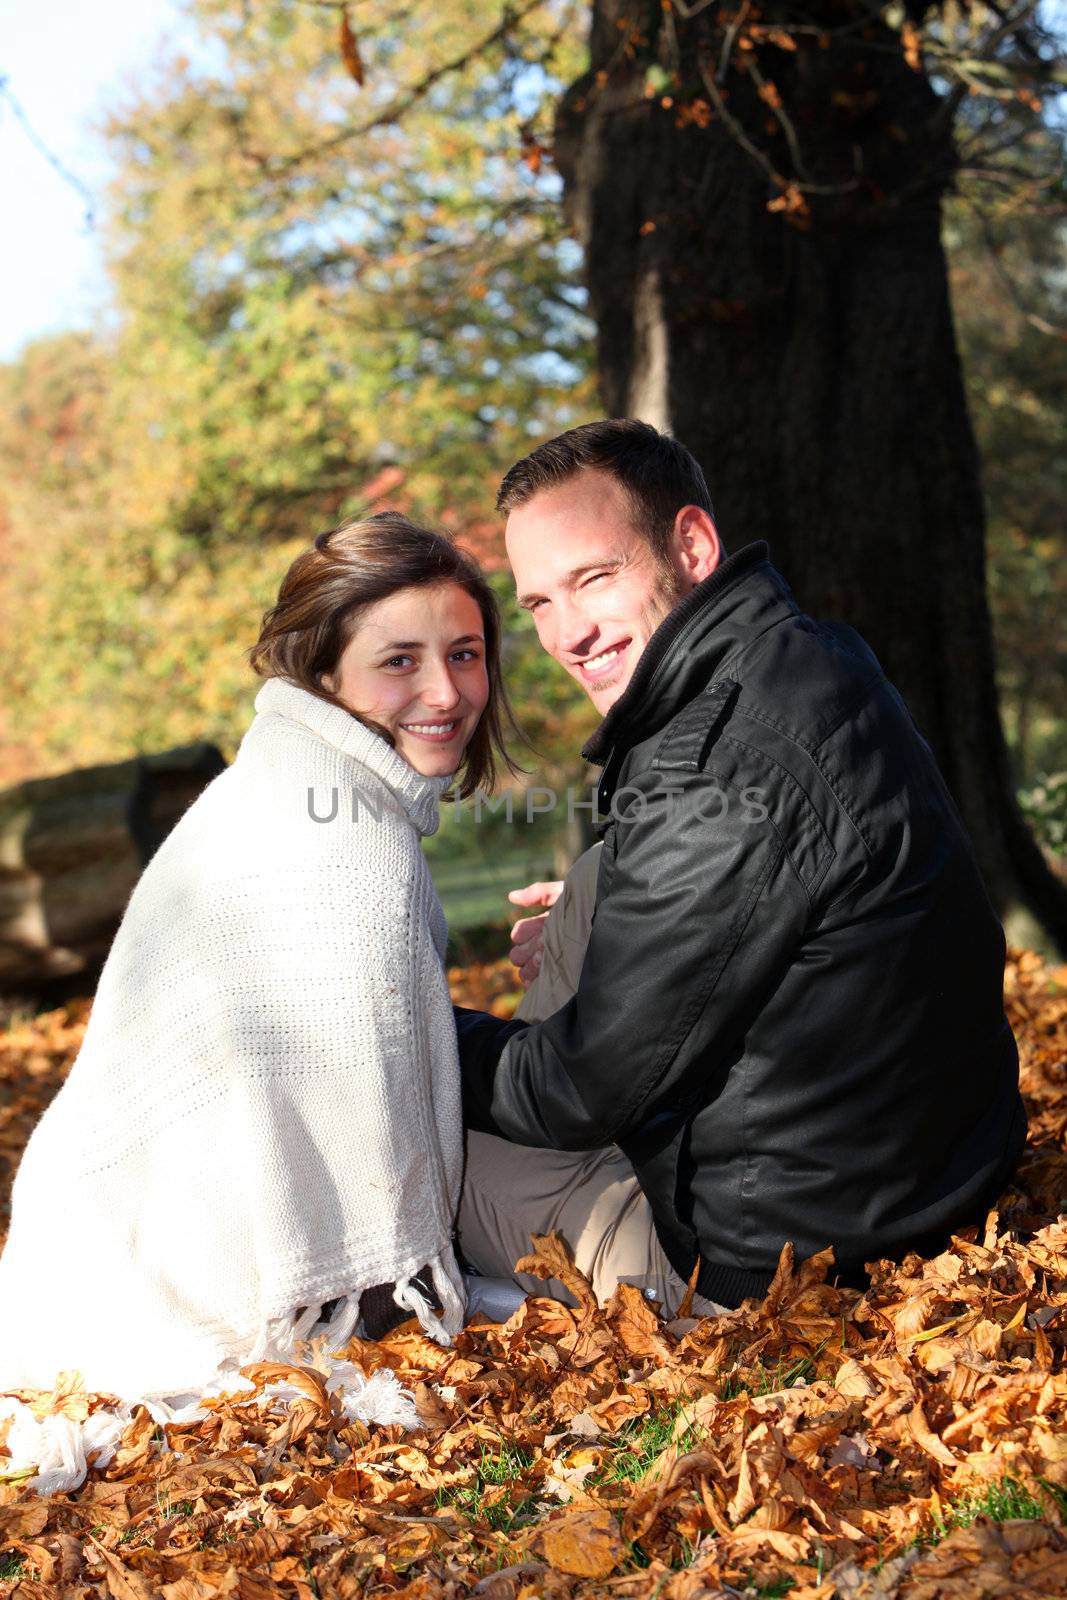 Smiling young couple sitting on the ground amongst fallen autumn leaves looking back over their shoulders at the camera Smiling young couple sitting on the ground amongst fallen autumn leaves looking back over their shoulders at the camera